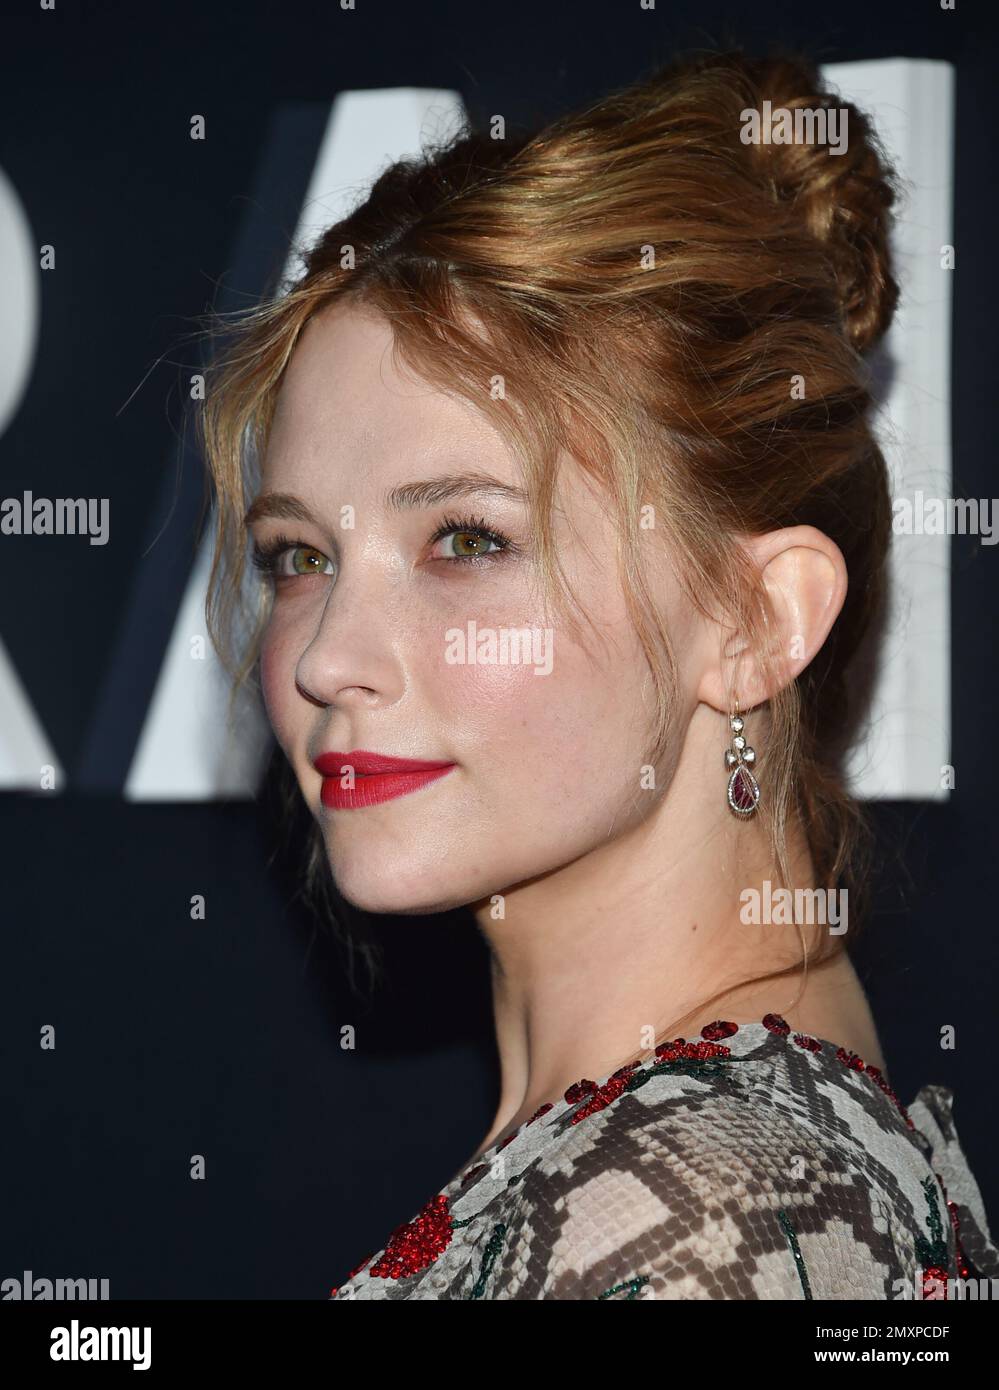 Actress Haley Bennett attends the premiere of 